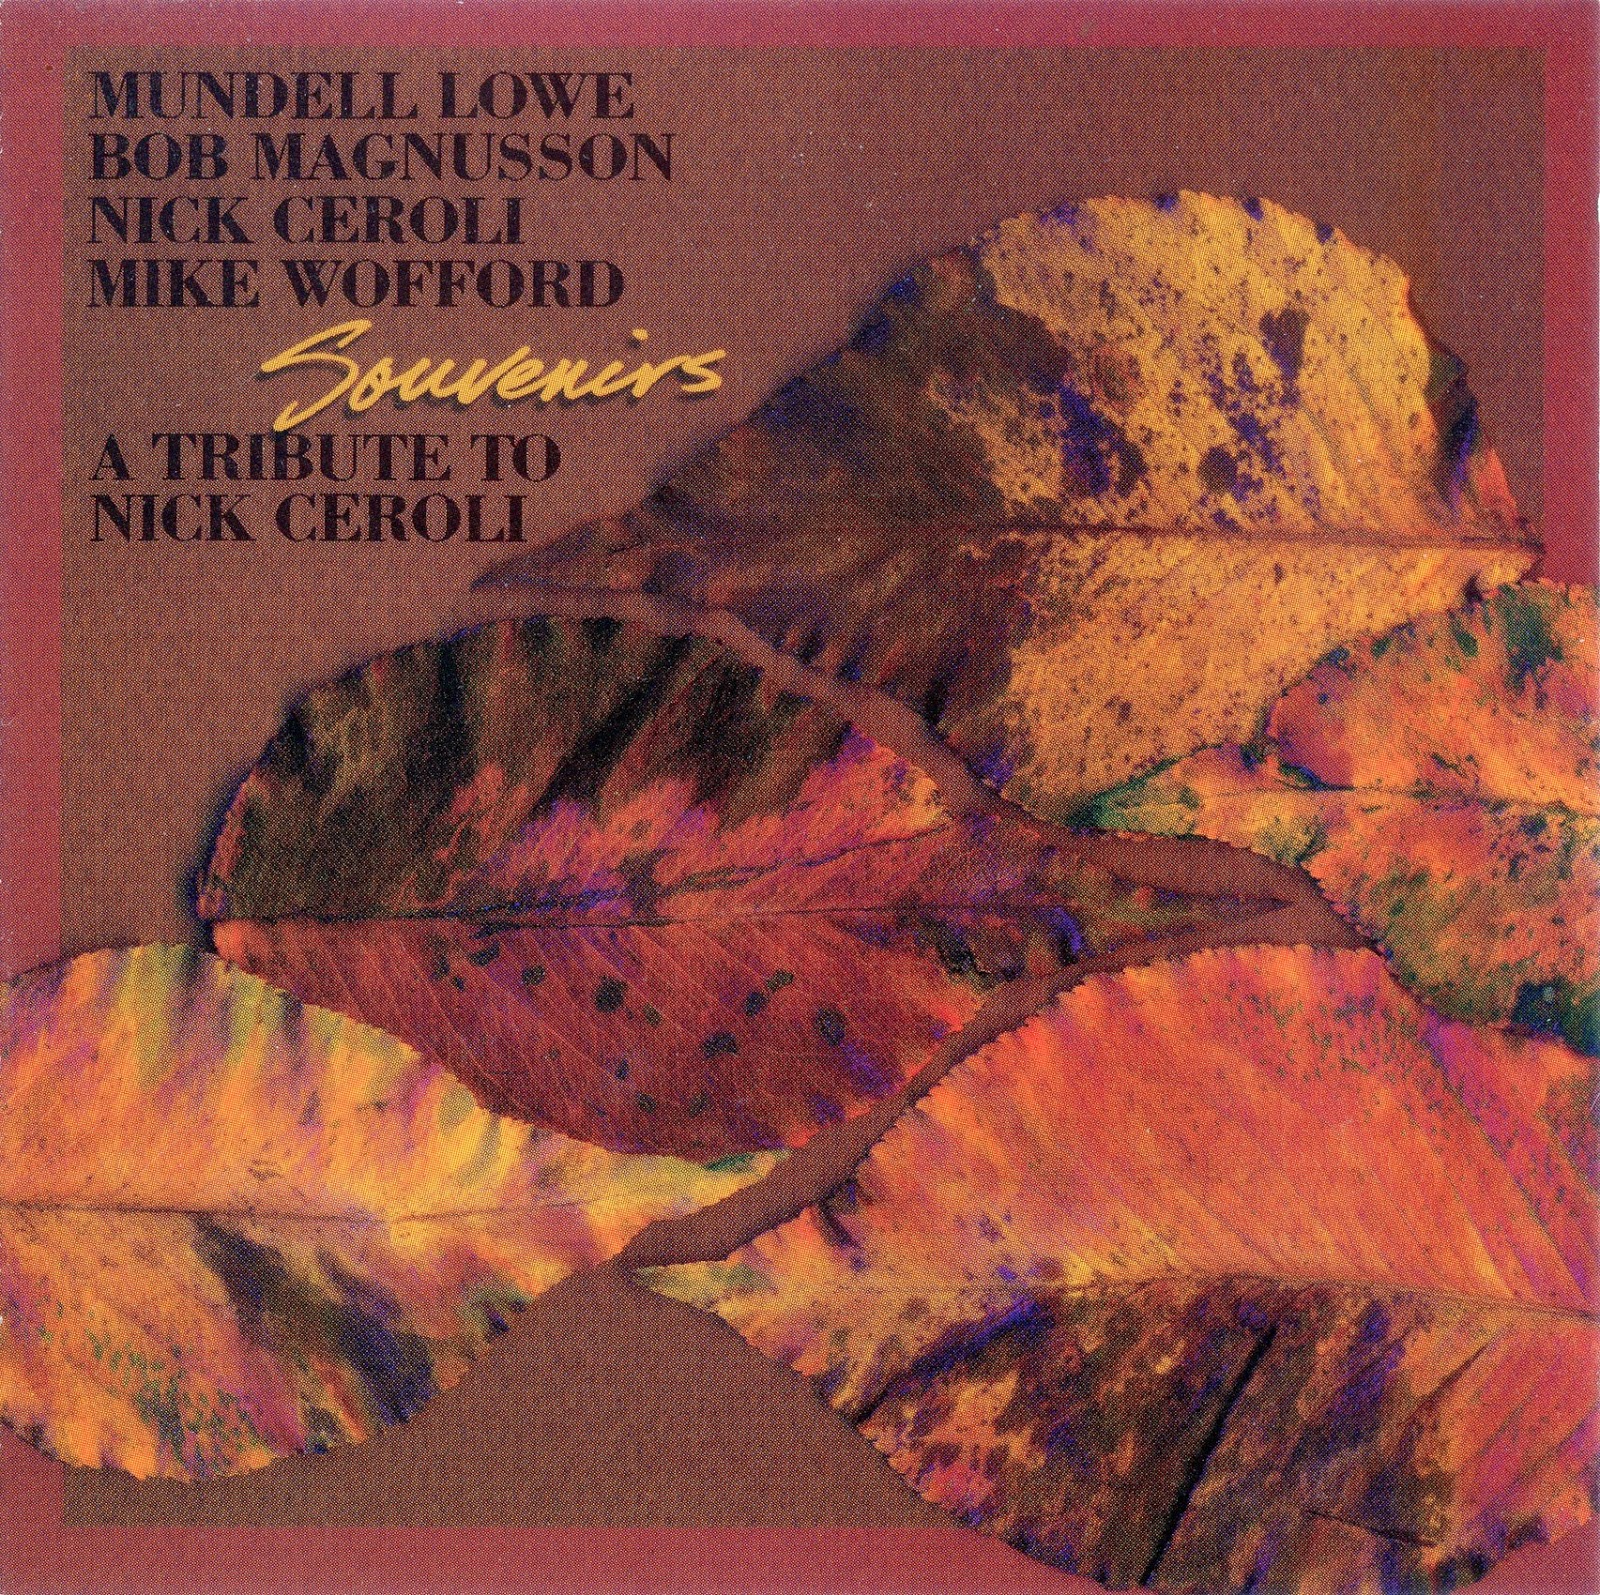 MUNDELL LOWE - Souvenirs: Tribute to Nick Ceroli cover 